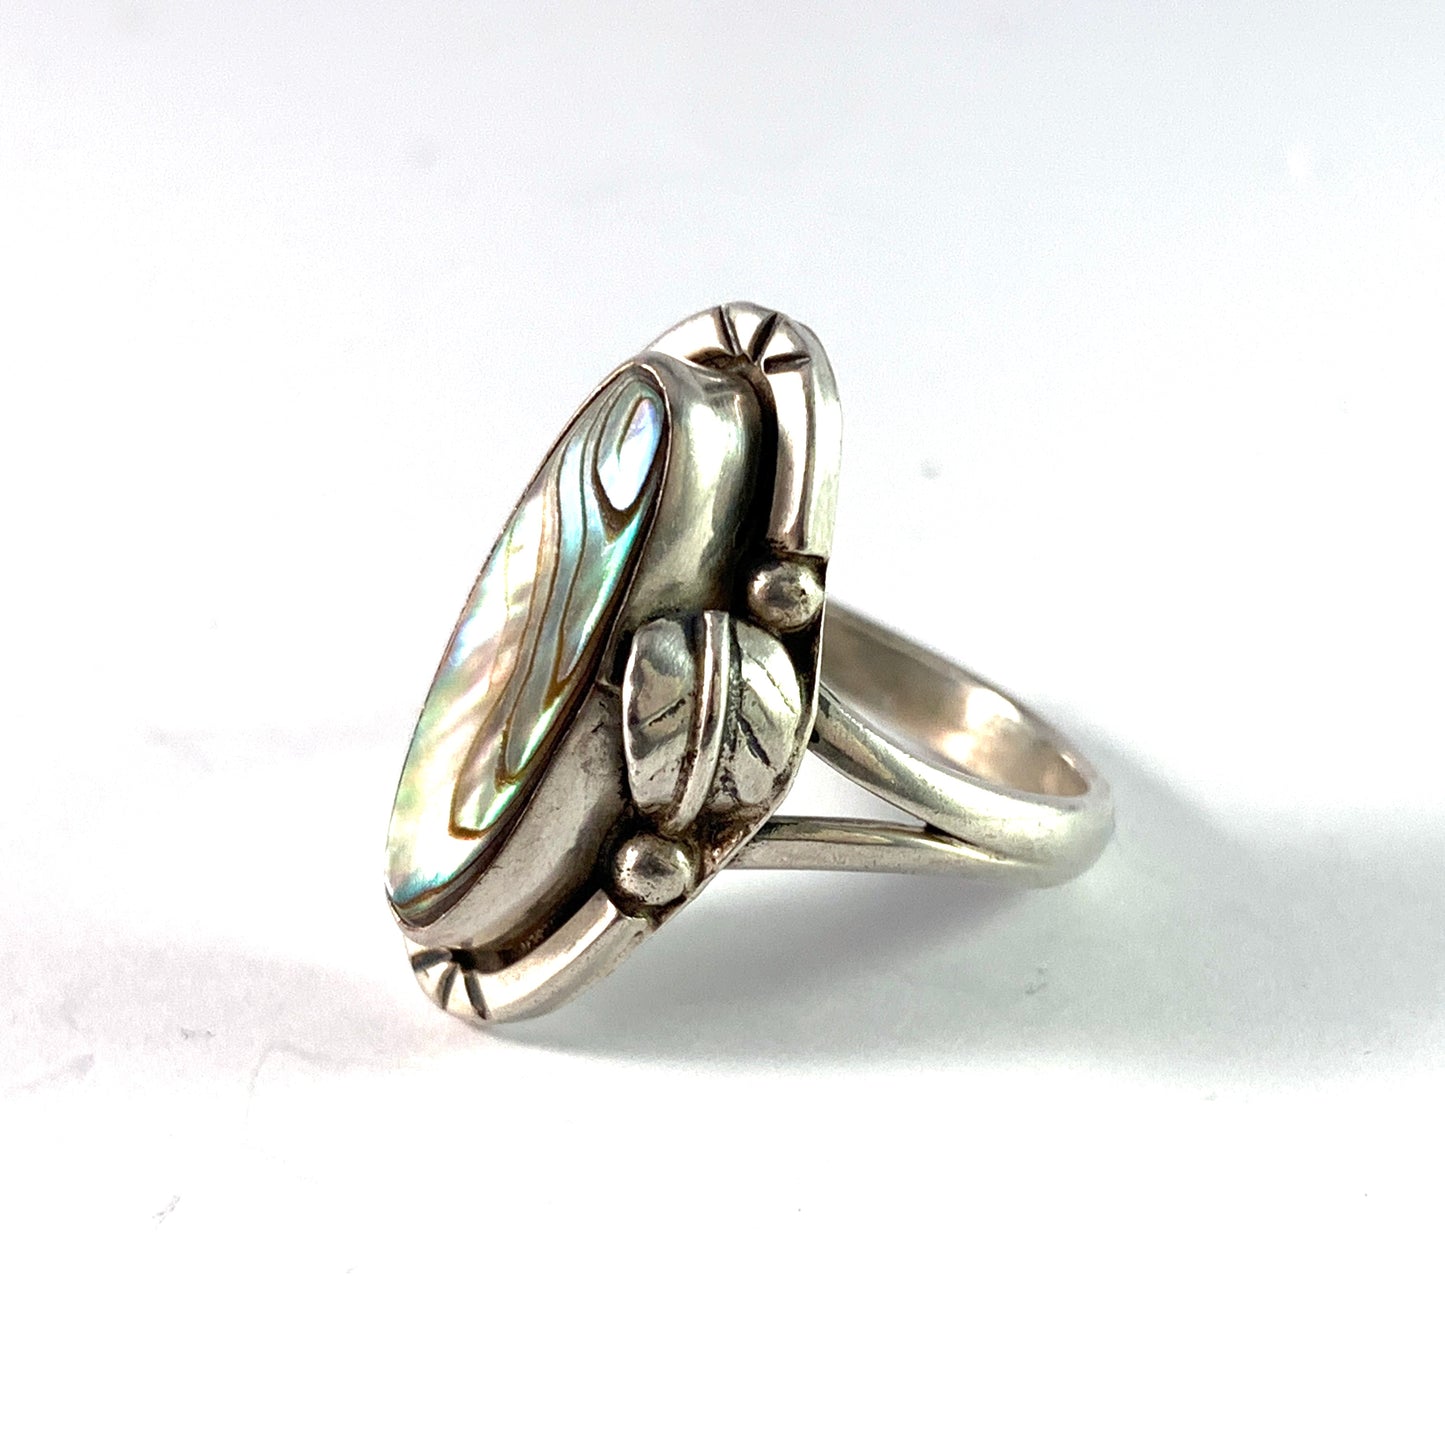 Maker GFI*, Mexico Vintage Mid Century Sterling Silver Abalone Ring.